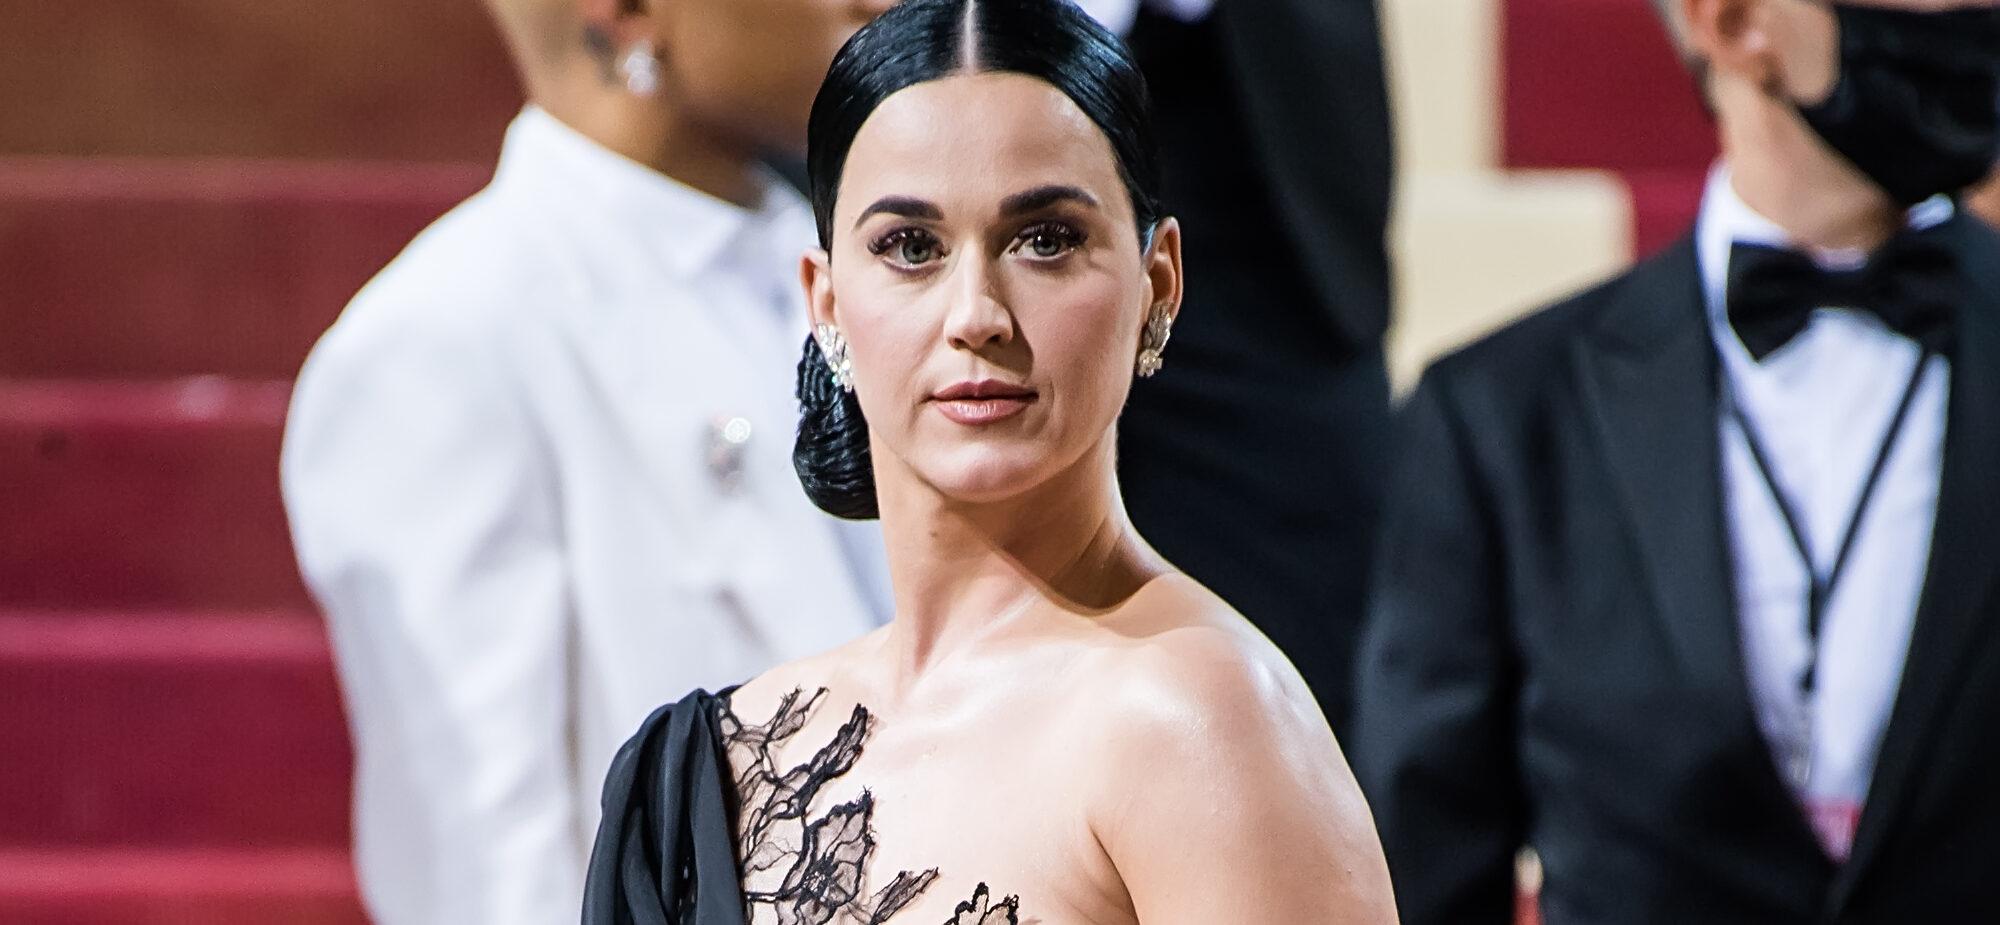 Katy Perry Set For ‘American Idol’ Return After Allegedly Being ‘Upset’ By Fan Backlash